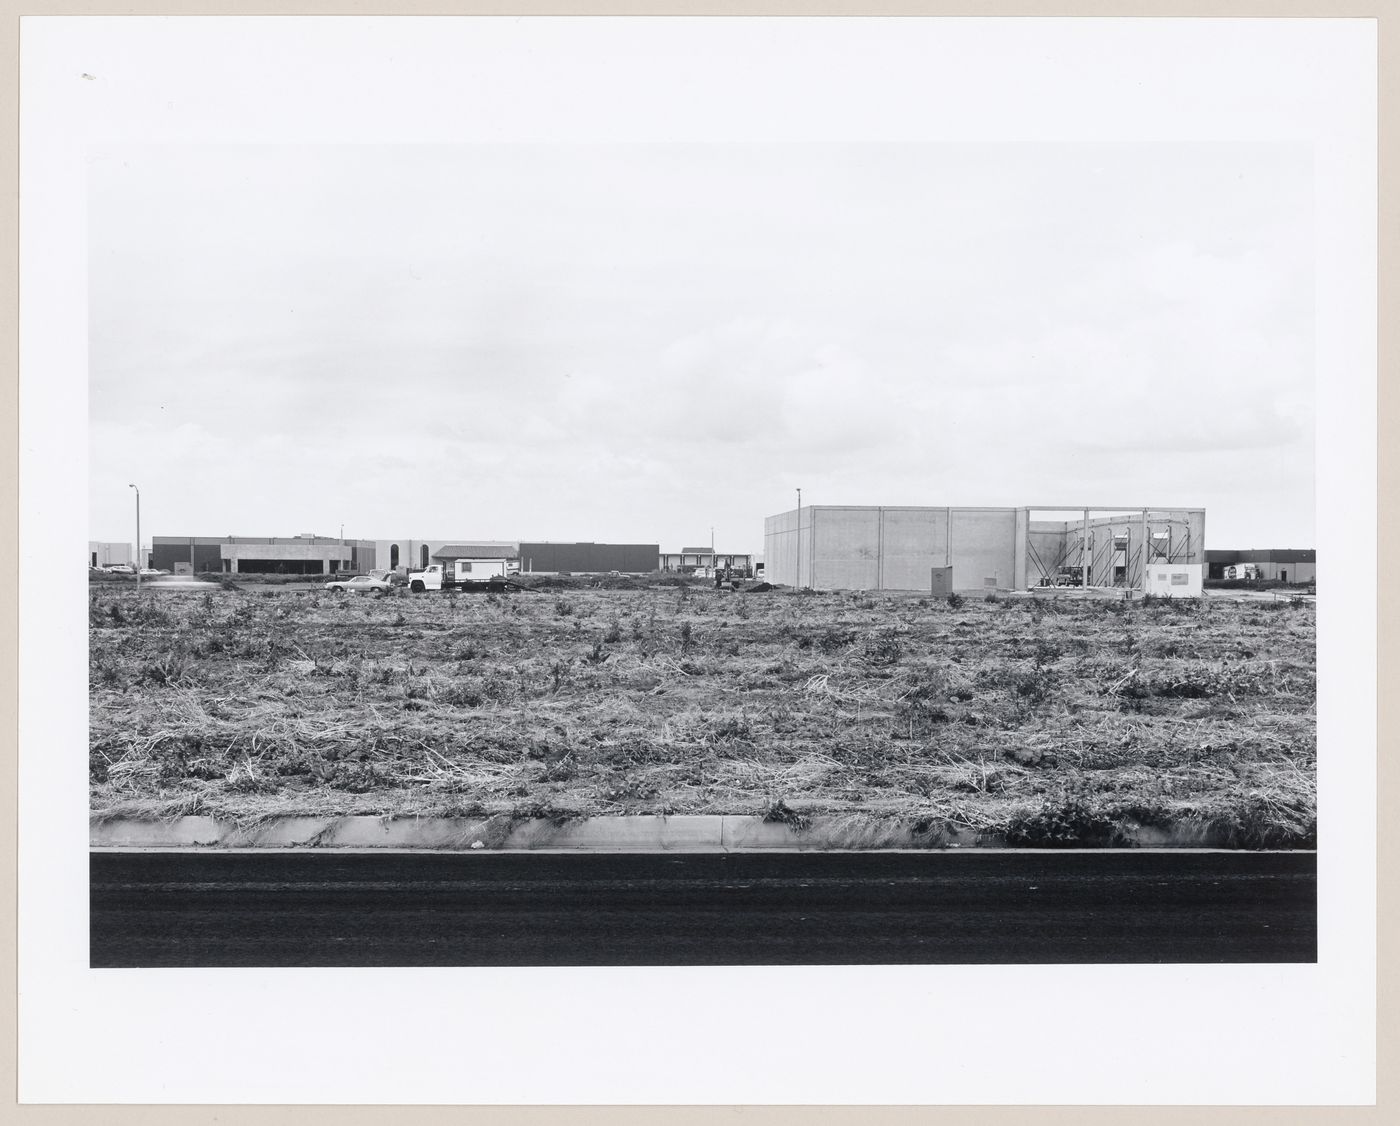 View of Jamboree Road between Beckman and Richter Avenues looking northwest, California, United States, from the series “The new Industrial Parks near Irvine, California”